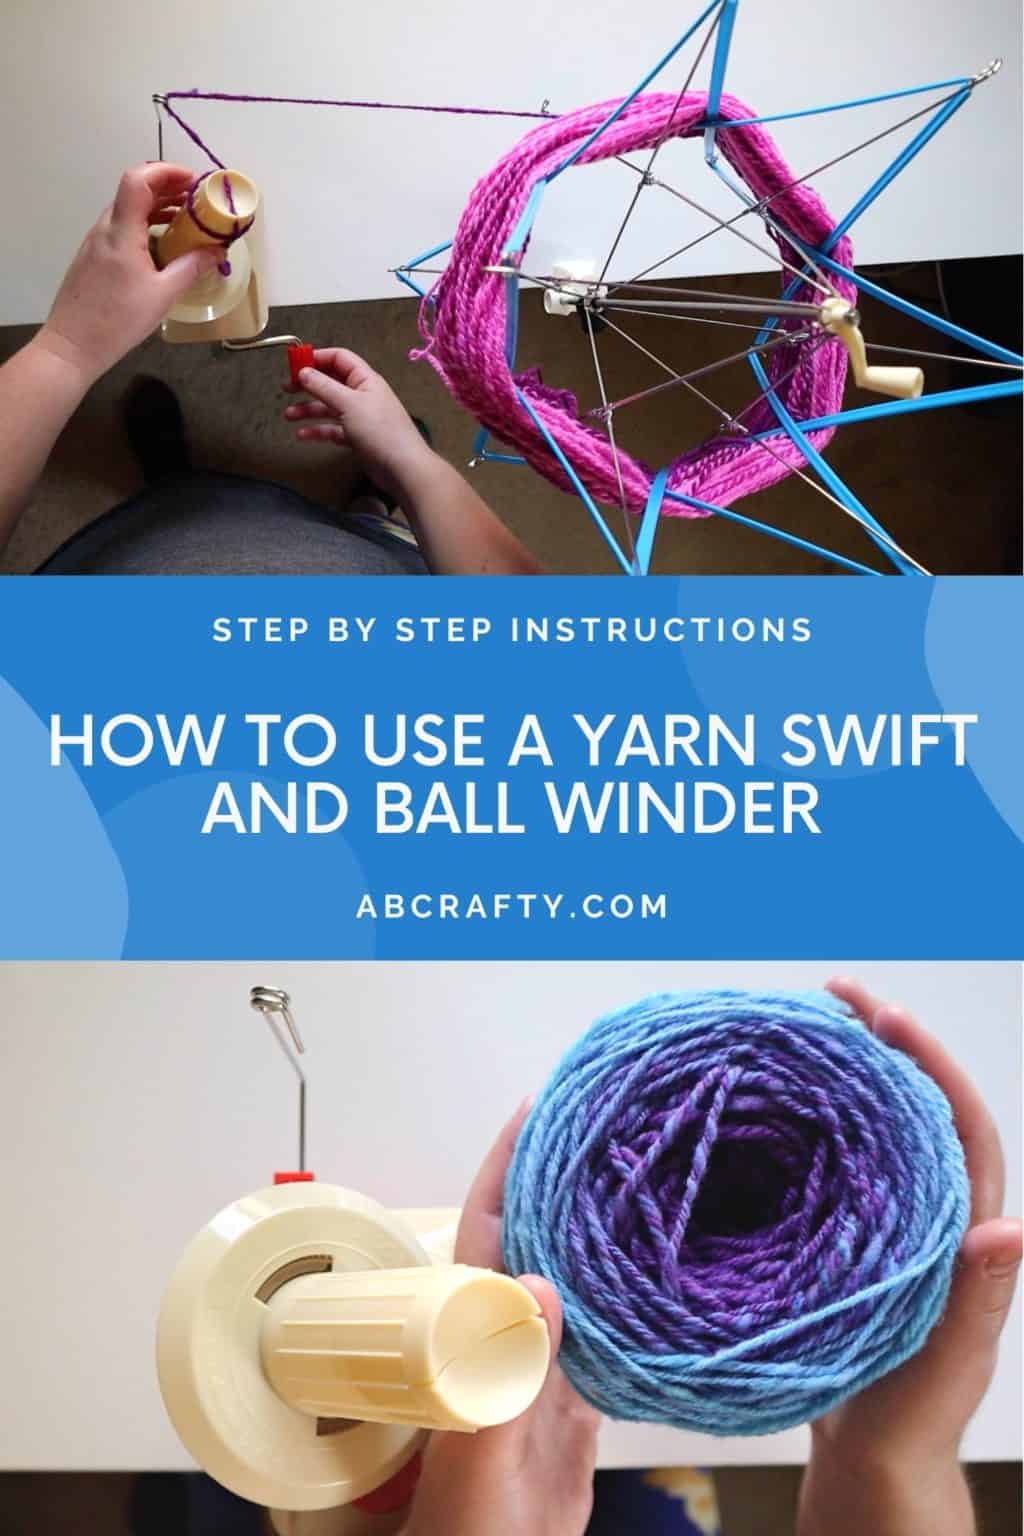 top photo shows pink yarn on a yarn swift and pulled onto a yarn winder and the bottom shows a ball of yarn next to the yarn winder with the title "how to use a yarn swift and ball winder"